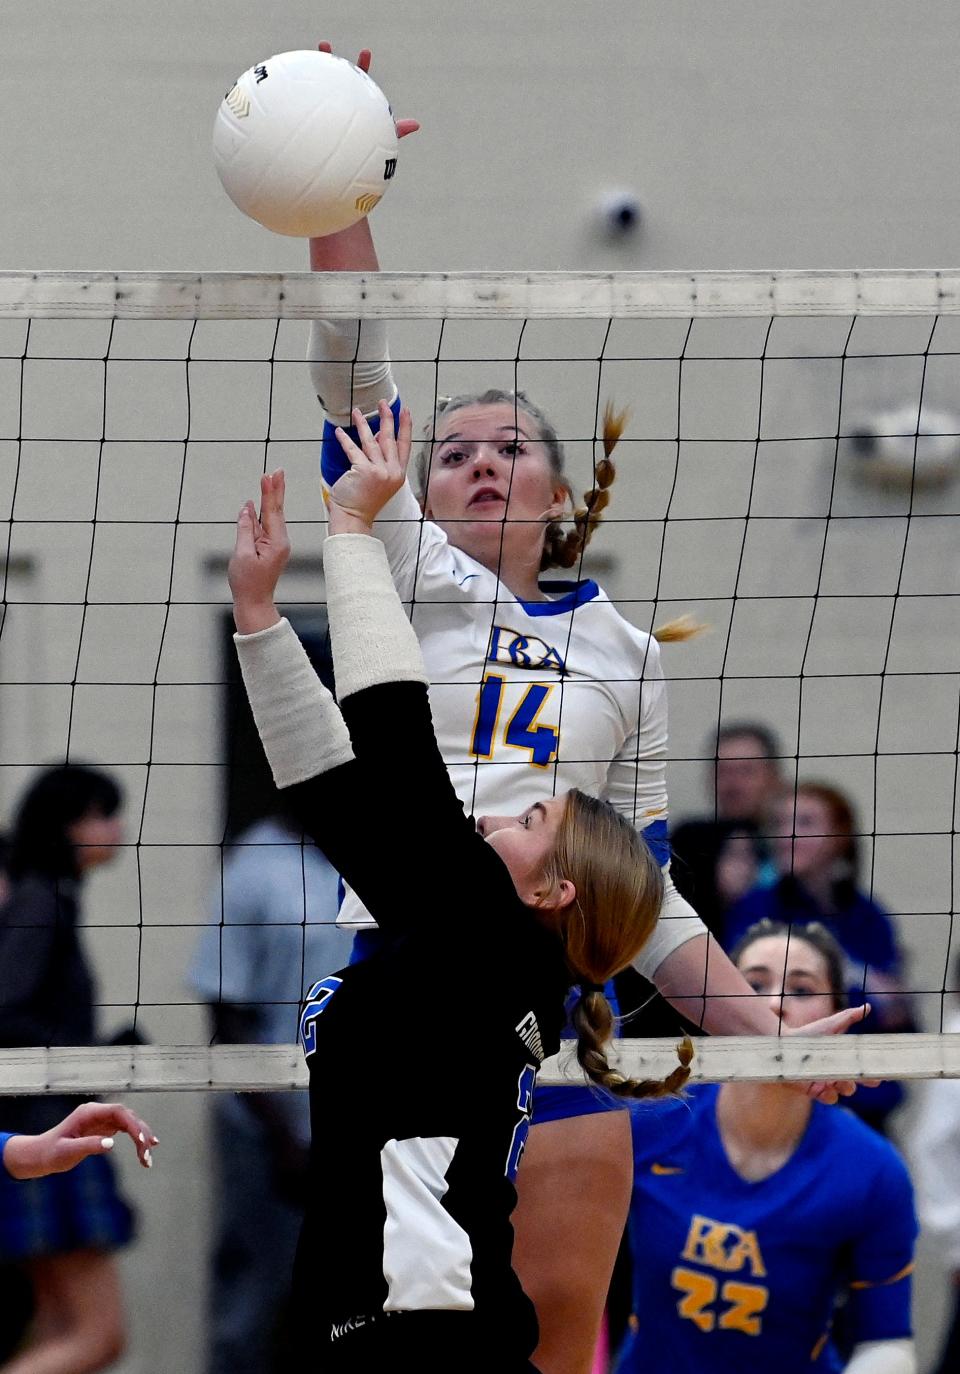 BGA’s Mackenzie Huntington (14) blocks a shot against Goodpasture setter Adeline Hardcastle (22) during a high school Division II-A State girls volleyball championship game on Thursday, Oct. 20, 2022, in Murfreesboro, Tenn.  